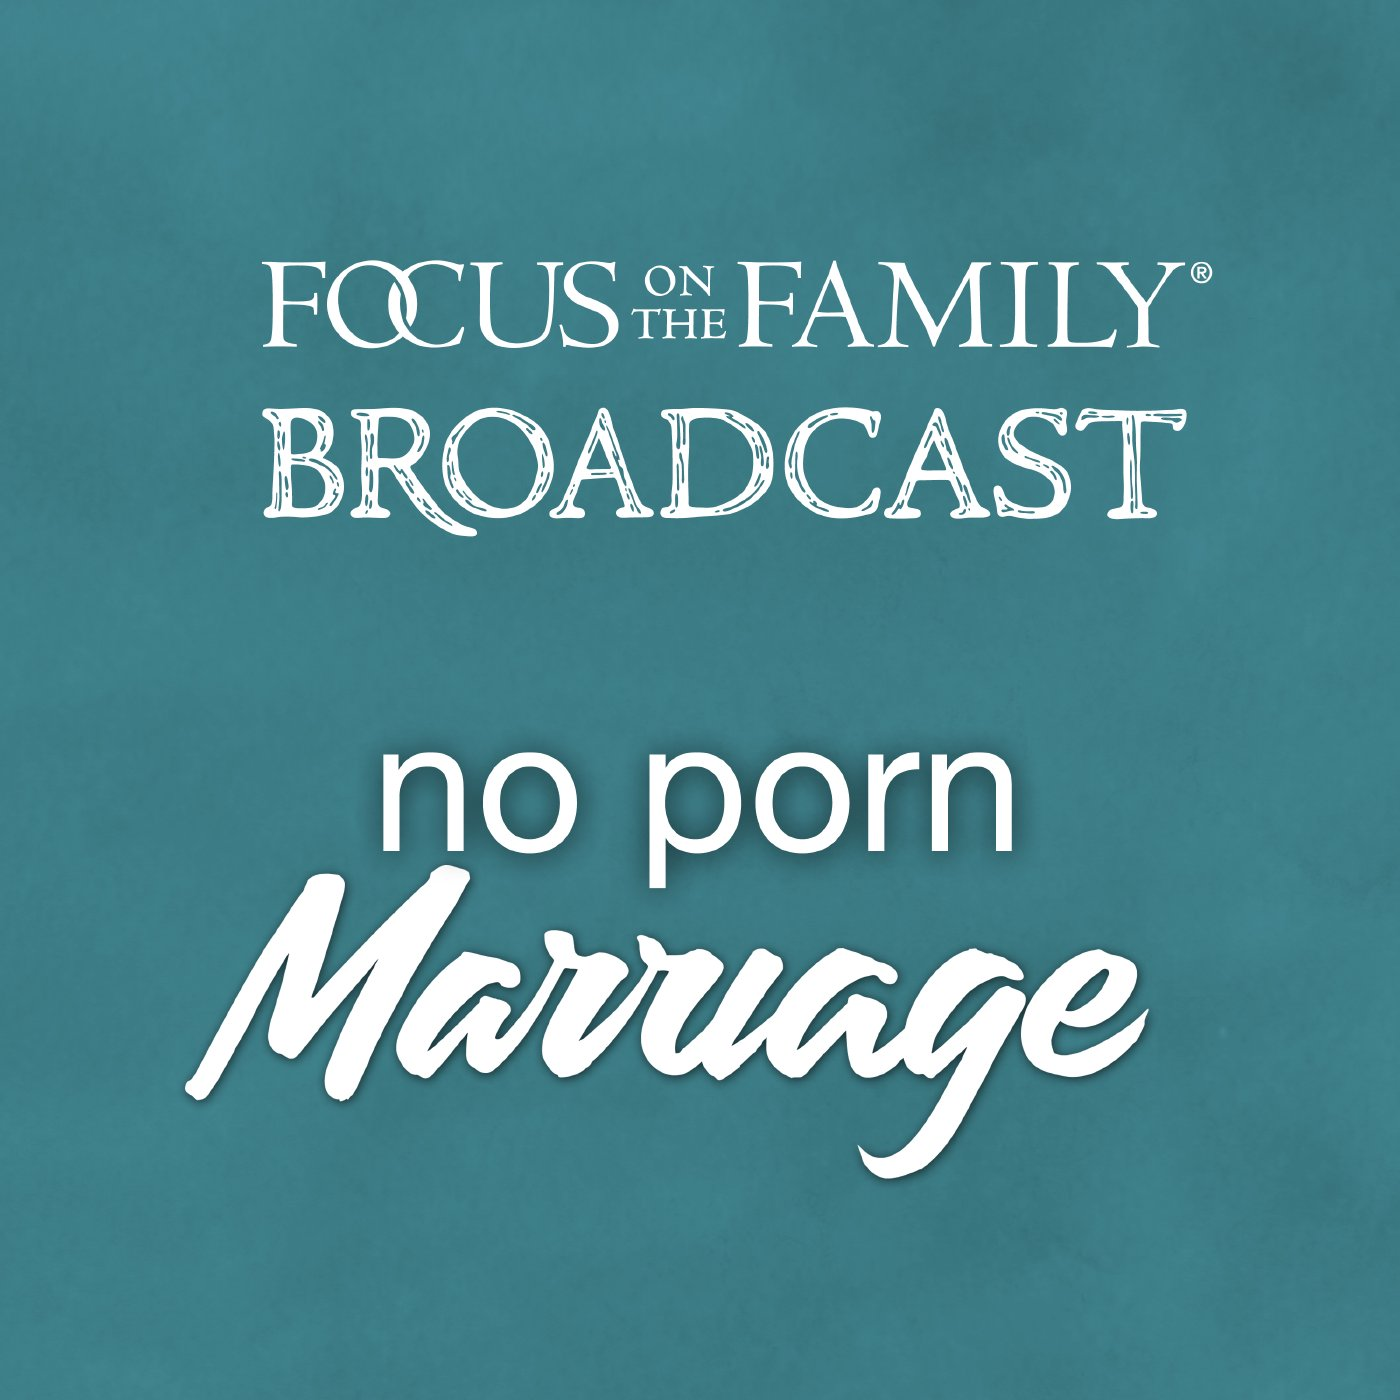 Episode 3 - Effects on Marriage